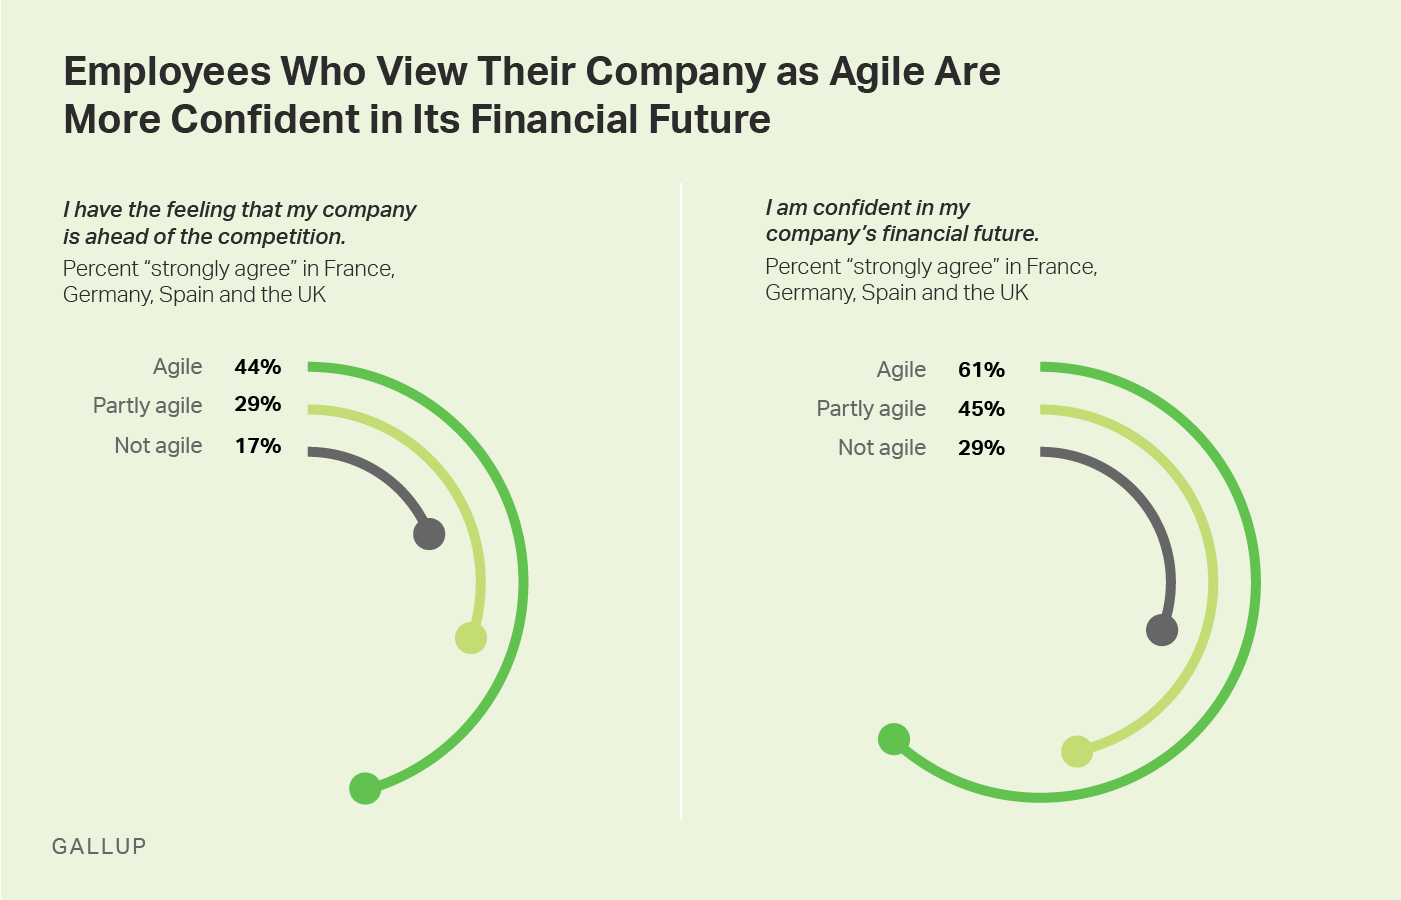 Graphic: Employees Who View Their Company as Agile Are More Confident in Its Financial Future.